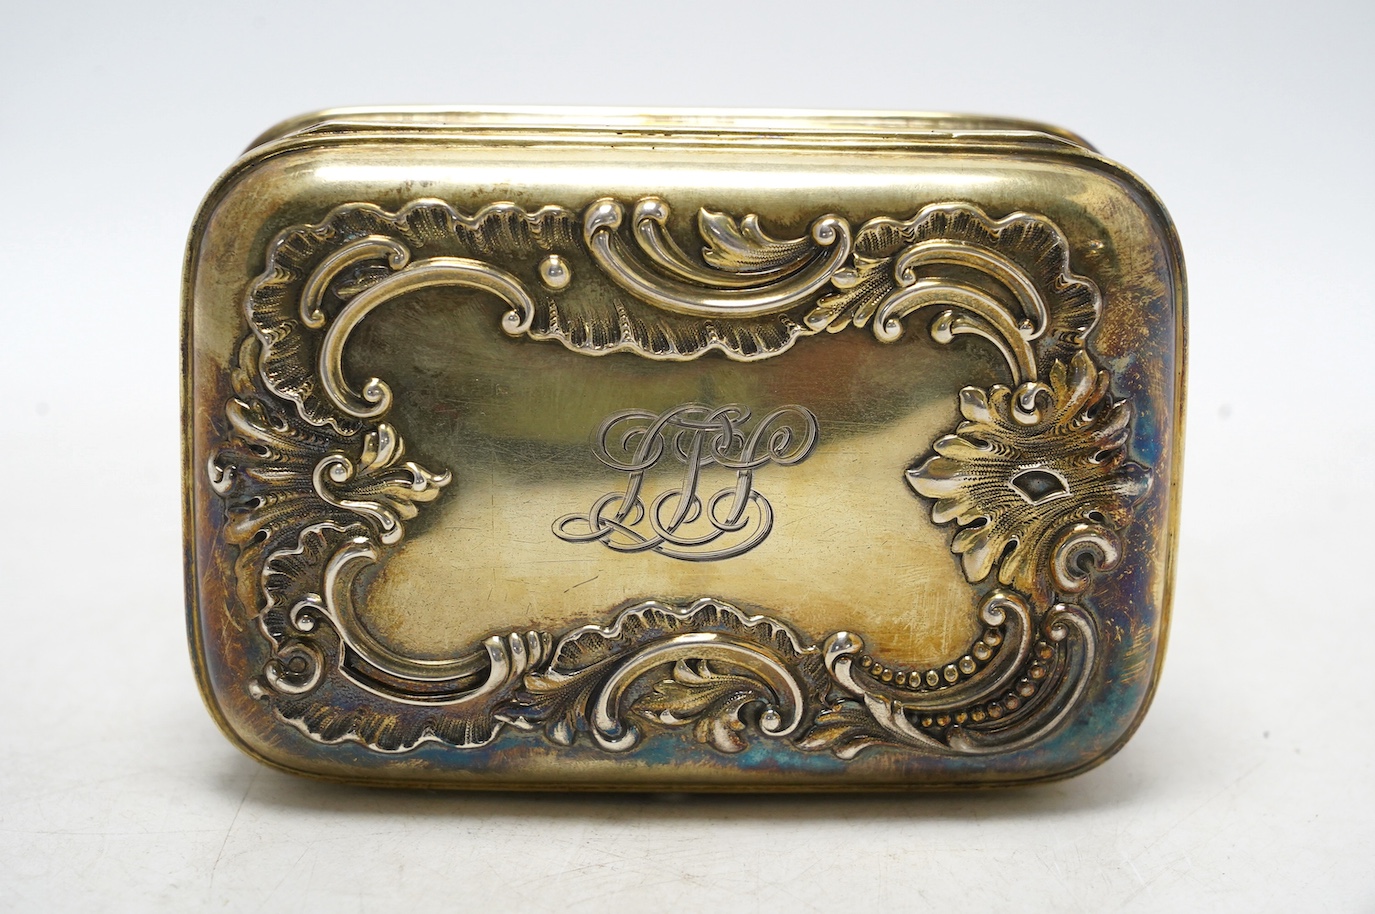 An American sterling trinket box with hinged cover and foliate scroll decoration, engraved with monogram, 13.4cm, gross weight 300 grams. Condition - fair